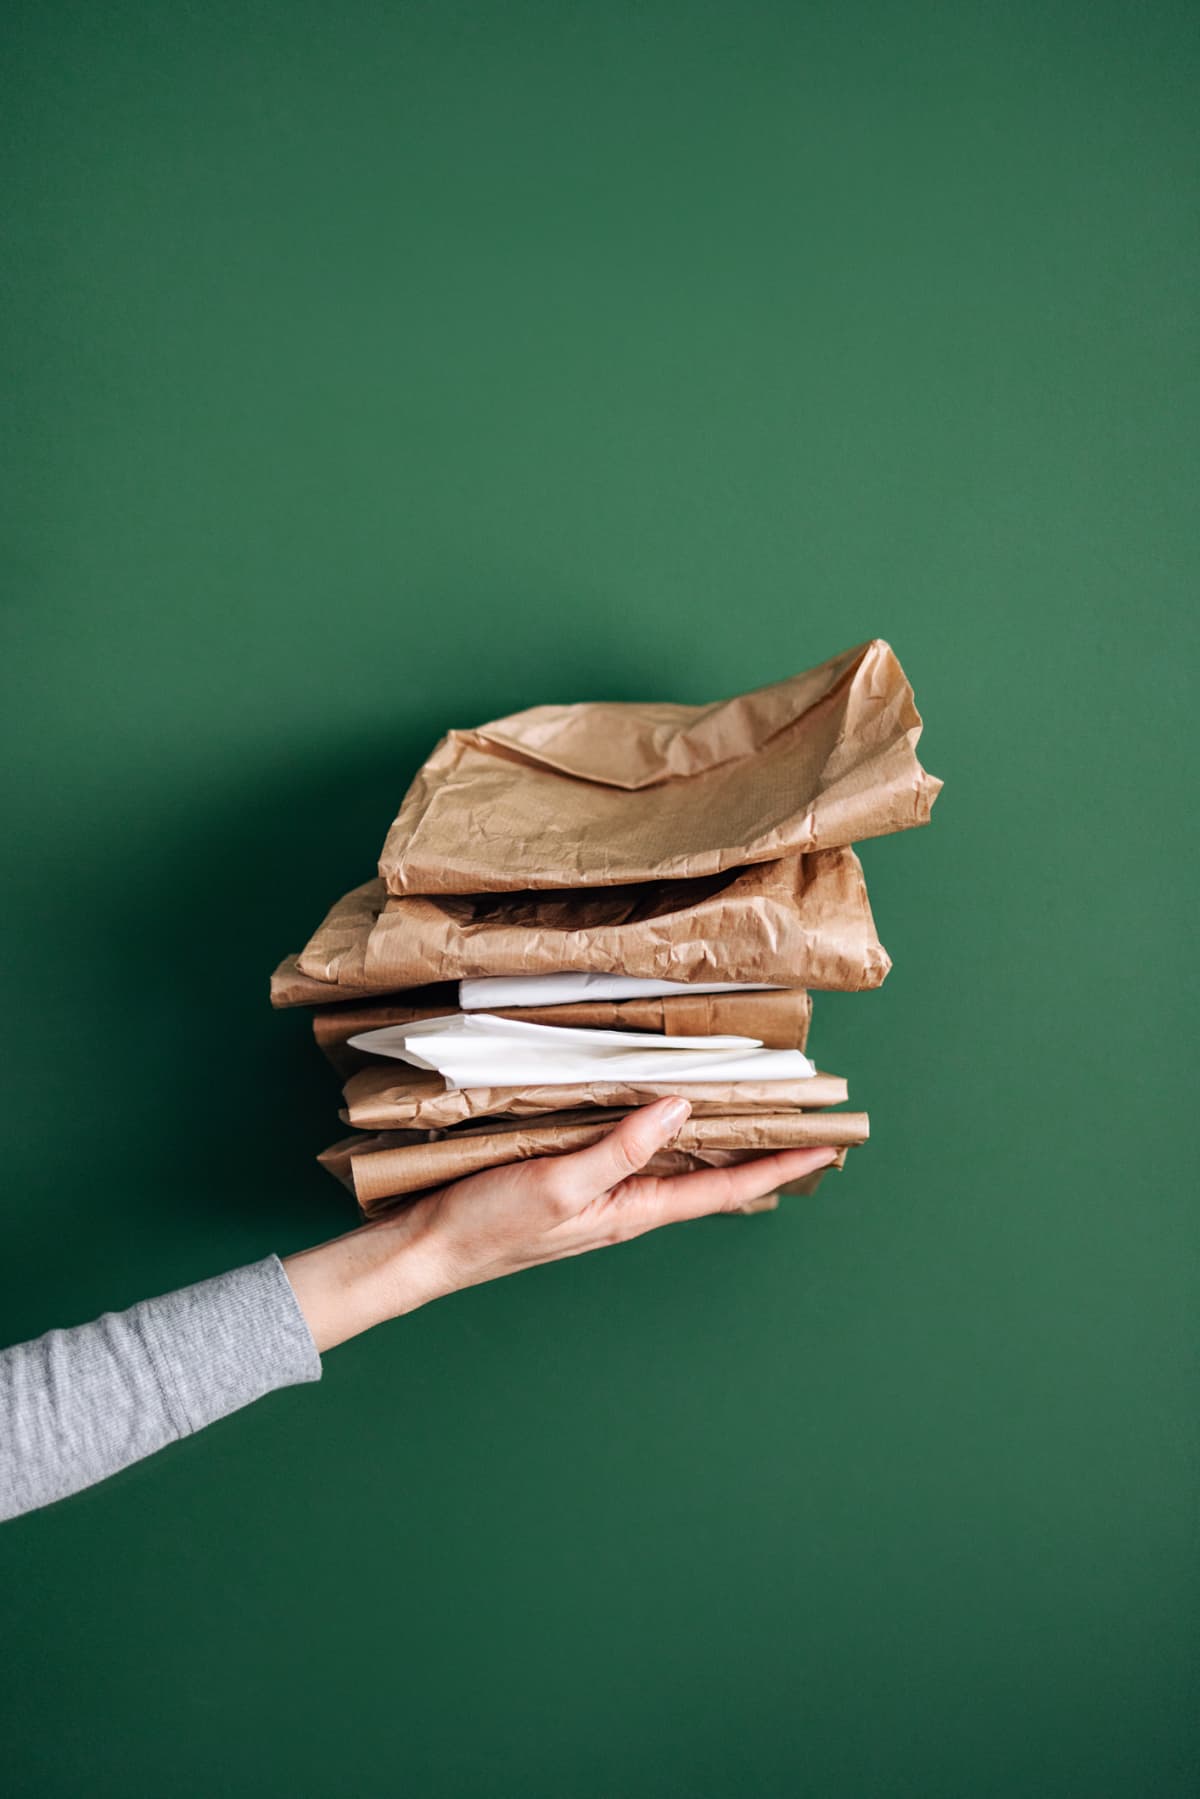 A person holding paper bags